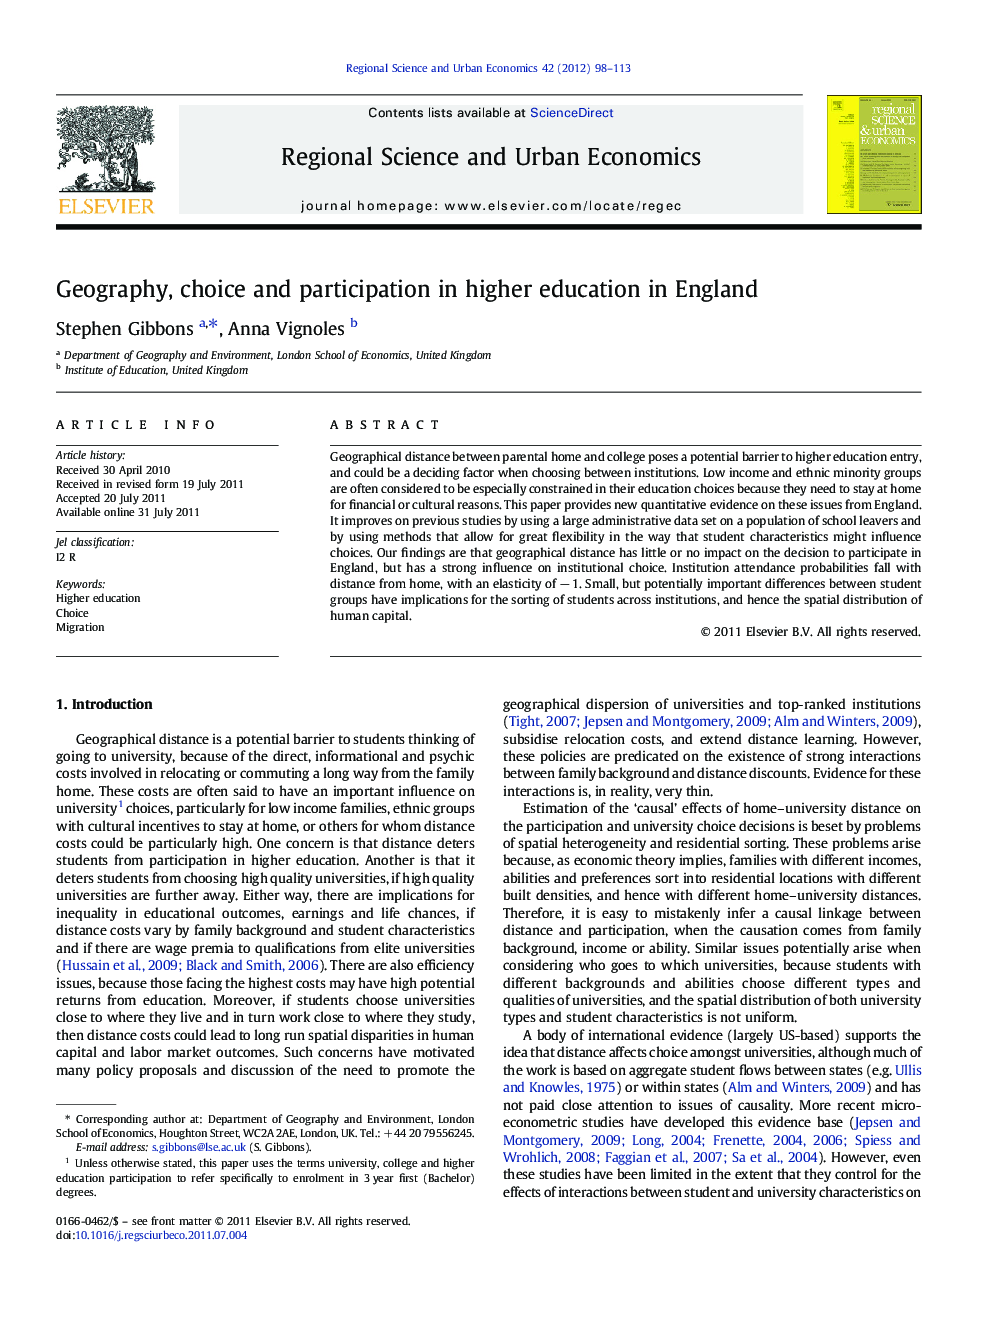 Geography, choice and participation in higher education in England